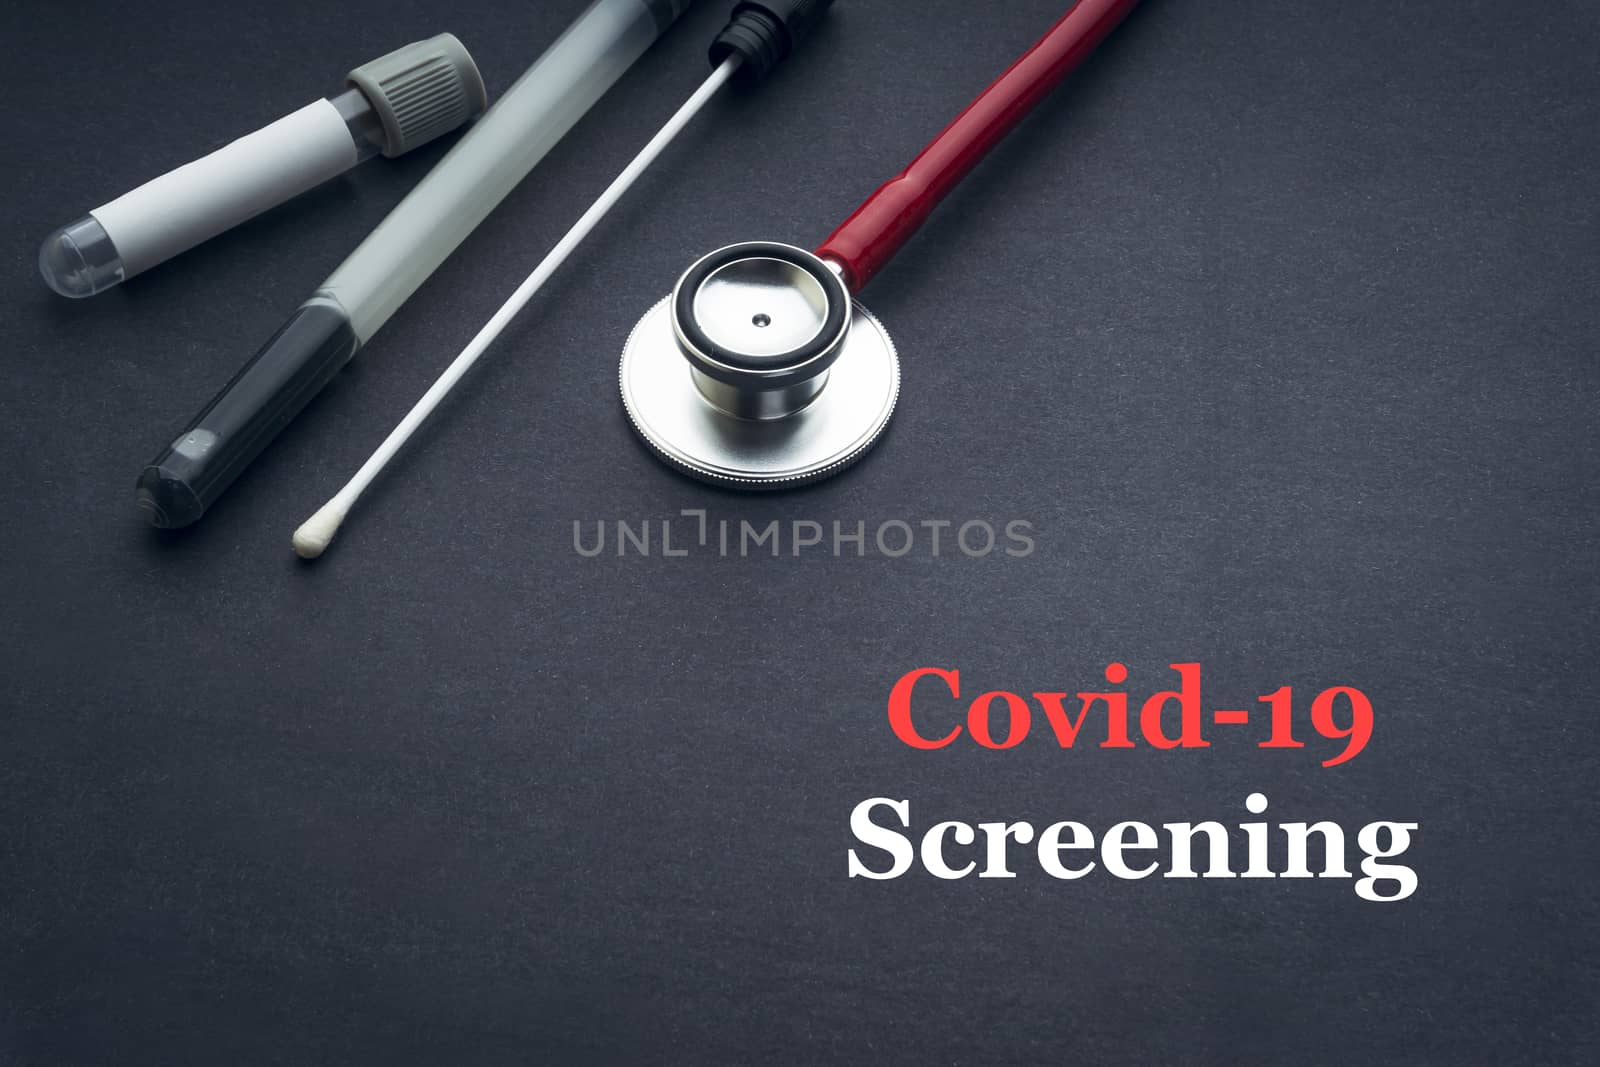 COVID-19 or CORONAVIRUS SCREENING text with stethoscope, medical swab and blood sample tube on black background by silverwings